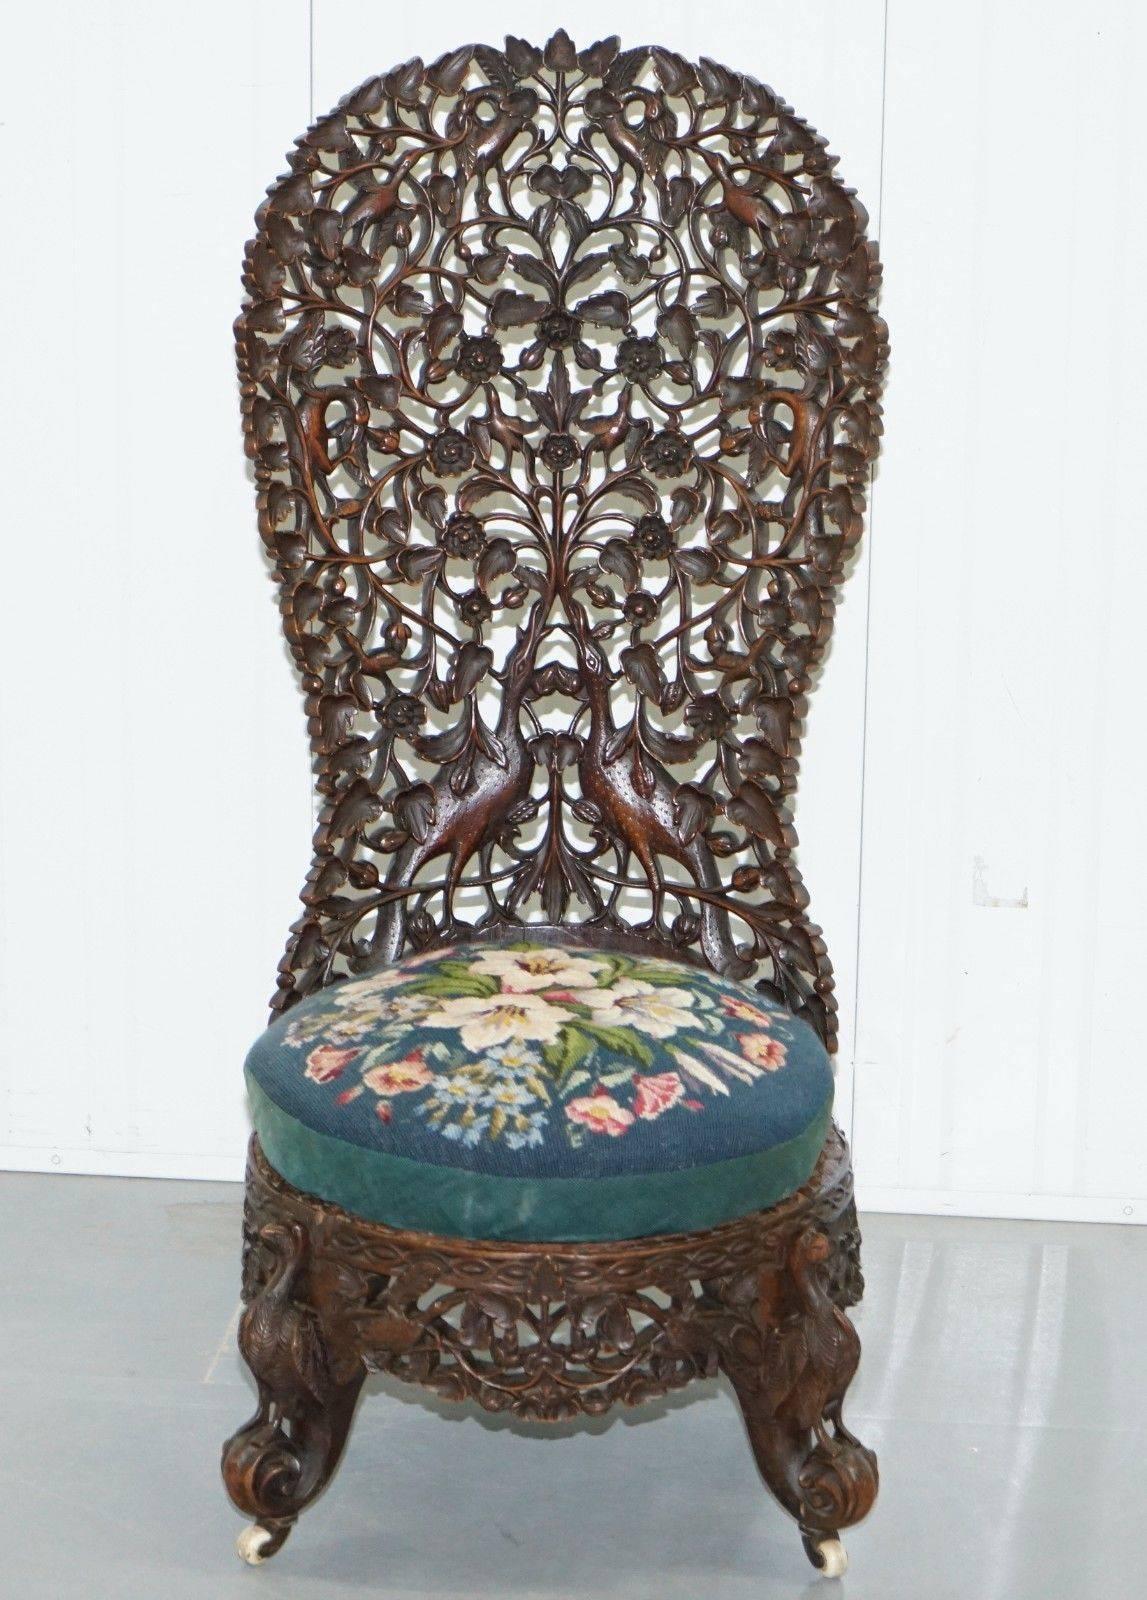 We are delighted to offer for sale this original, circa 1870 Burmese hand-carved depicting birds and flowers from top to bottom nursing spoon back chair

A very good looking and well made period piece, extremely carved from all angles, front to